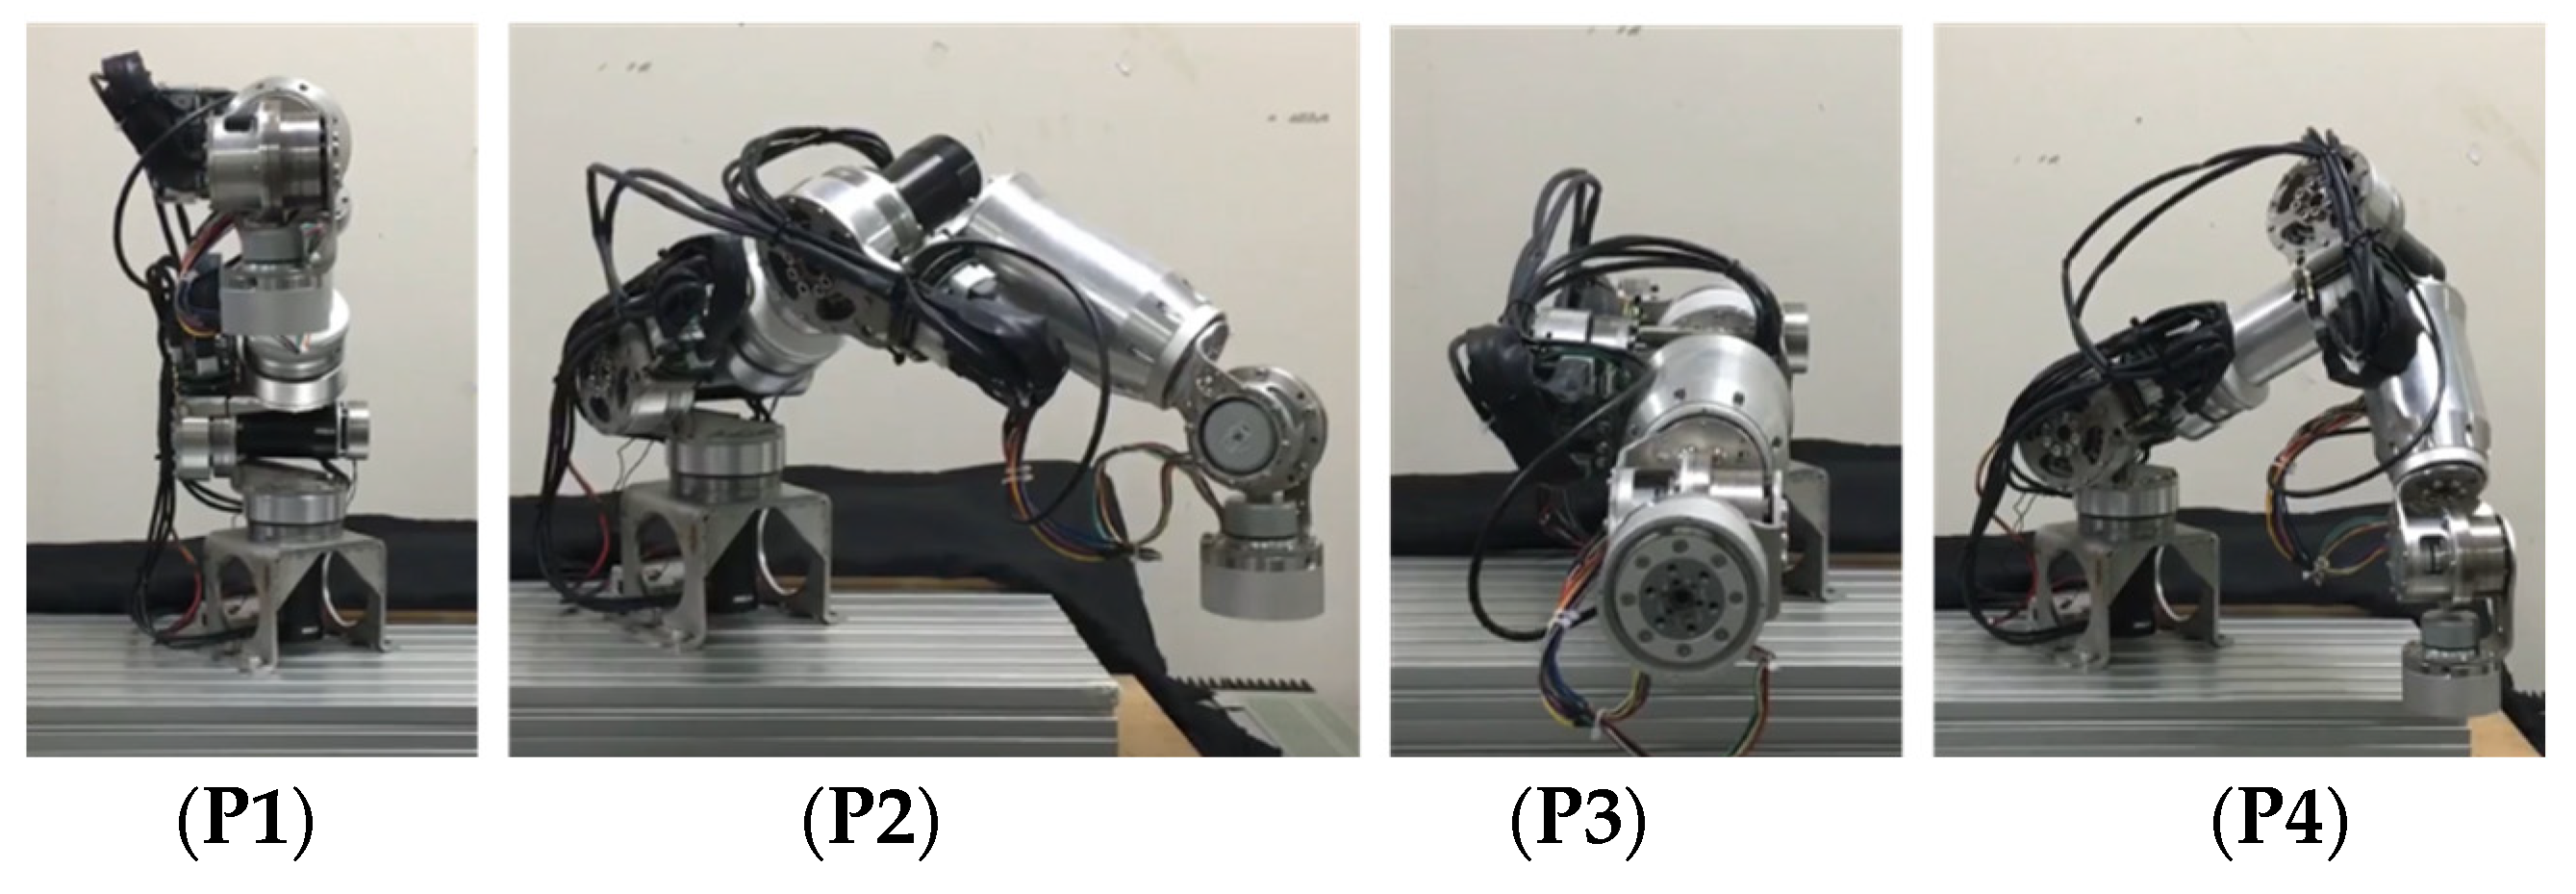 Sensors | Free Full-Text | A Sensorless and Low-Gain Brushless DC Motor  Controller Using a Simplified Dynamic Force Compensator for Robot Arm  Application